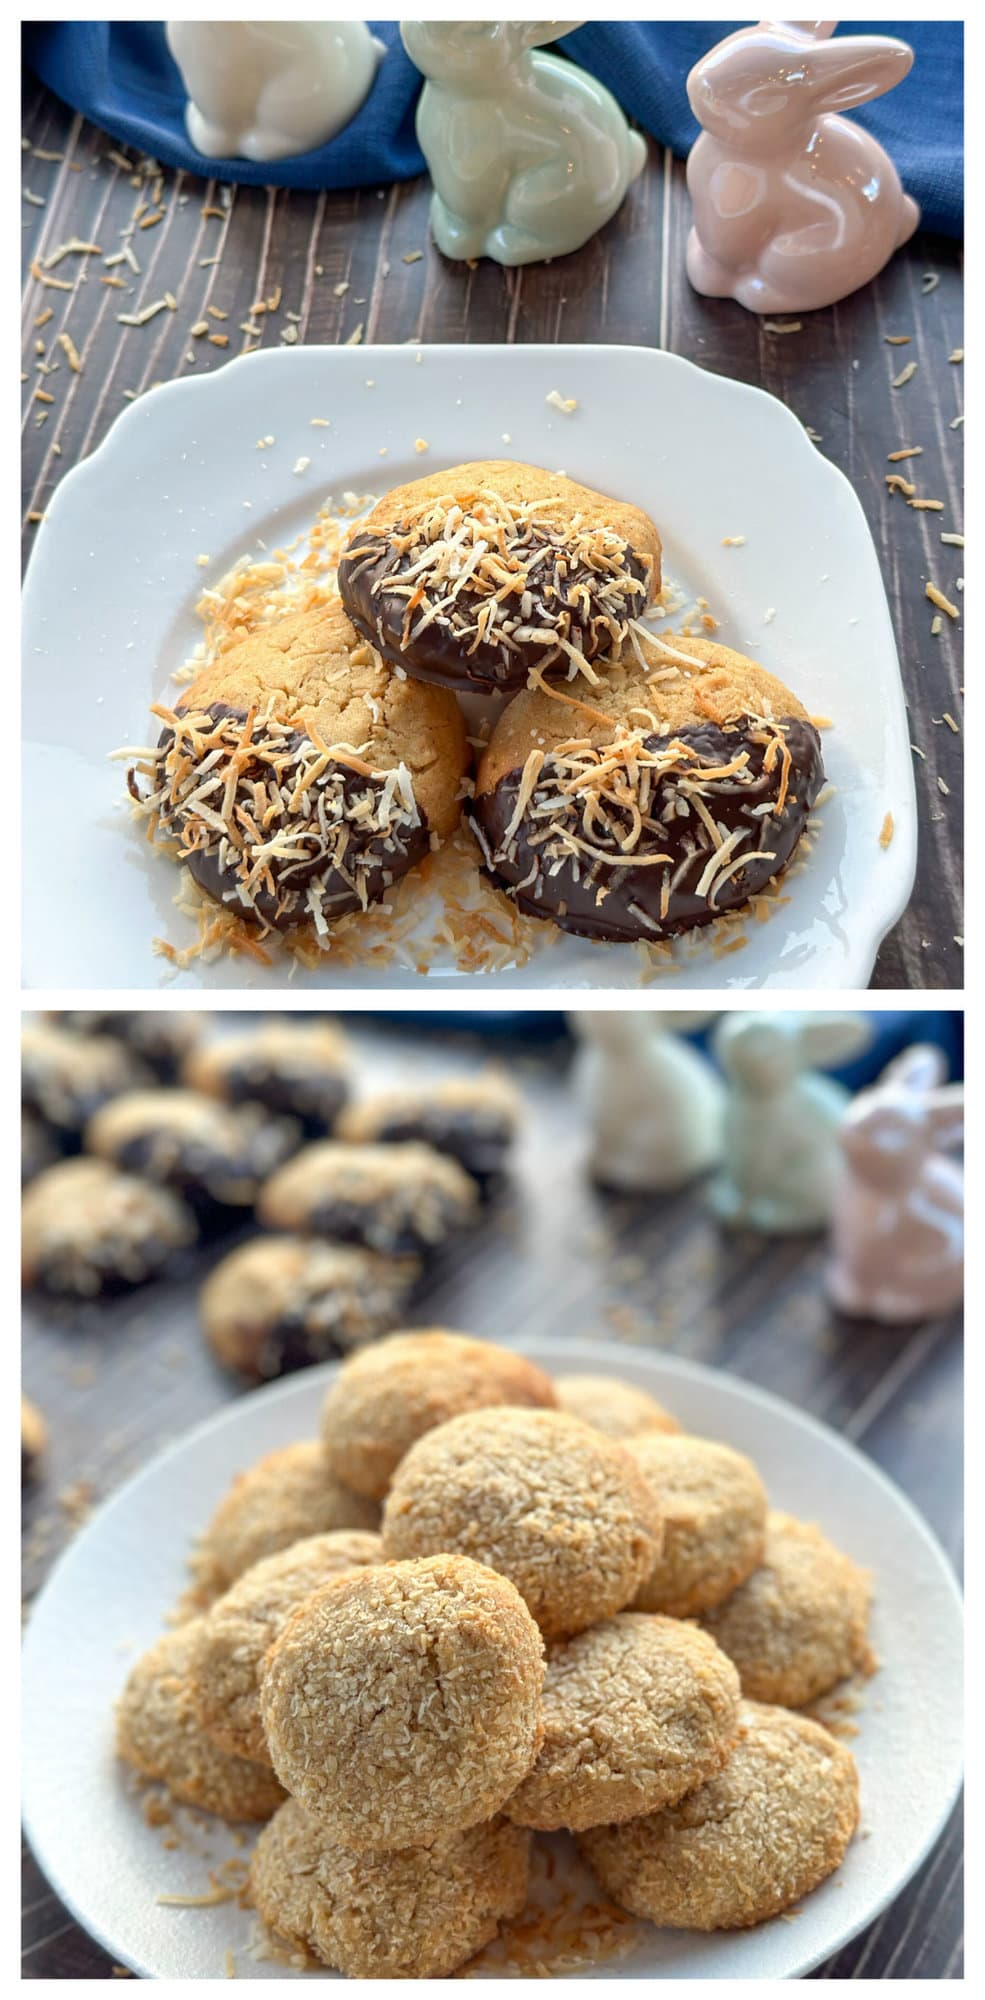 Plates with brown butter coconut cookies, one dipped in chocolate, the other rolled in coconut